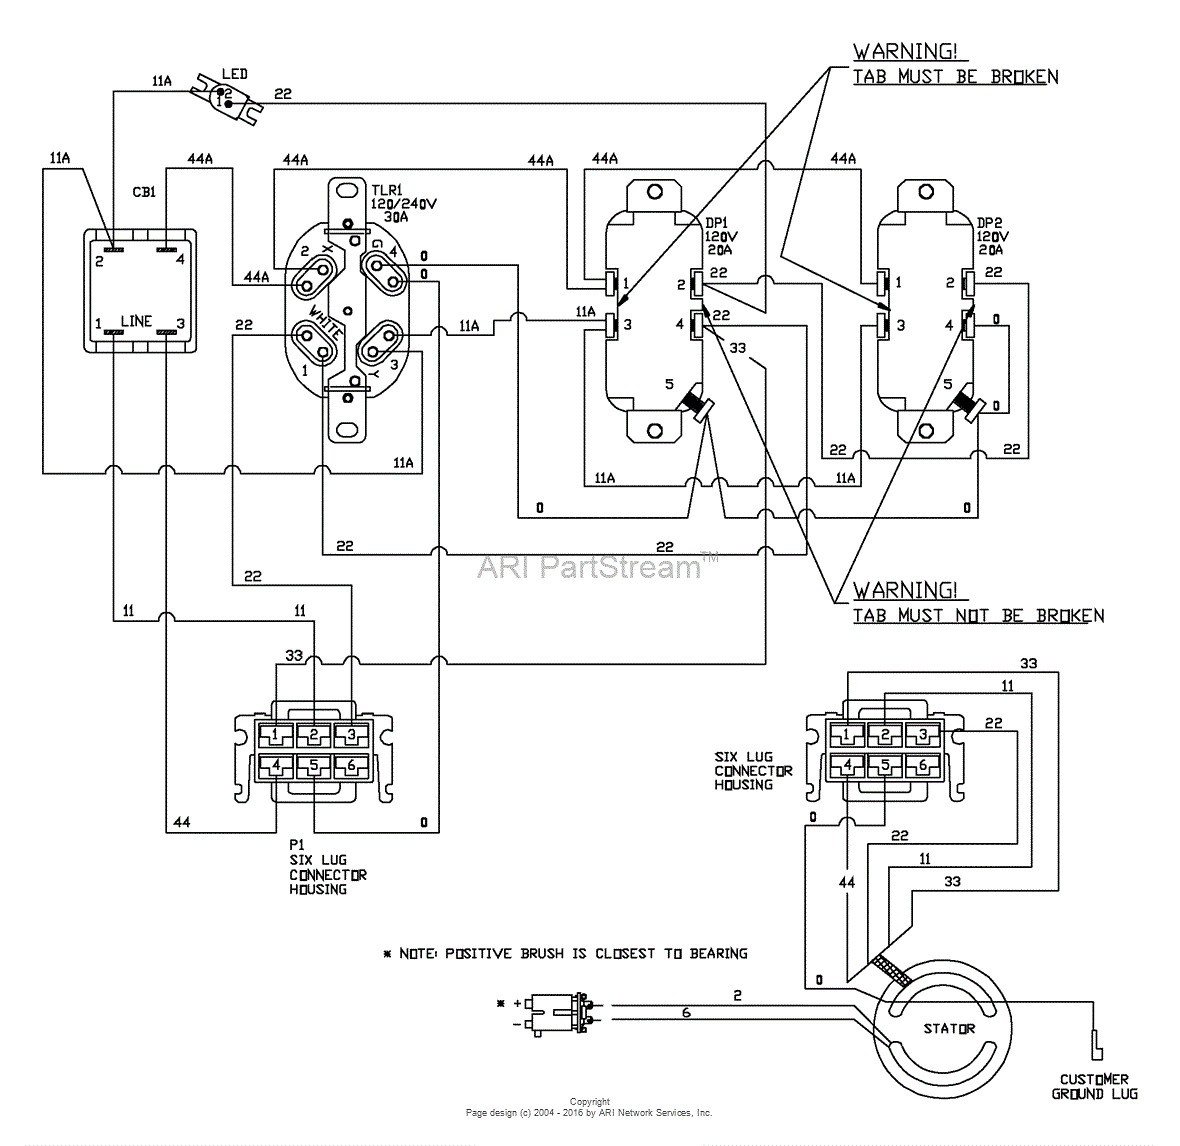 Briggs And Stratton Power Products 0 5 550 Watt Ripping Engine Wiring Diagram